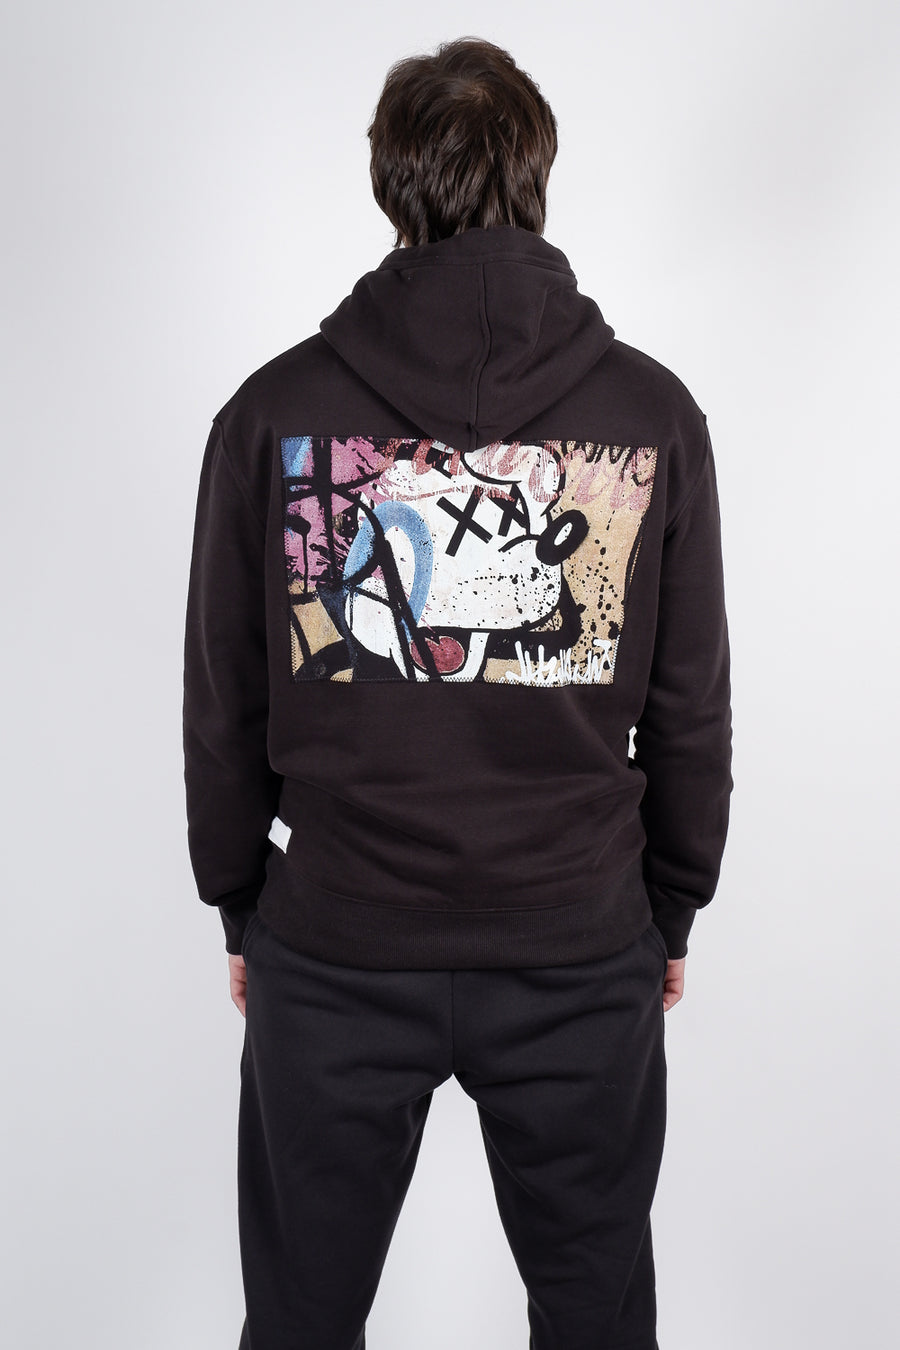 Buy the ABE Mickey Hoodie in Black at Intro. Spend £50 for free UK delivery. Official stockists. We ship worldwide.